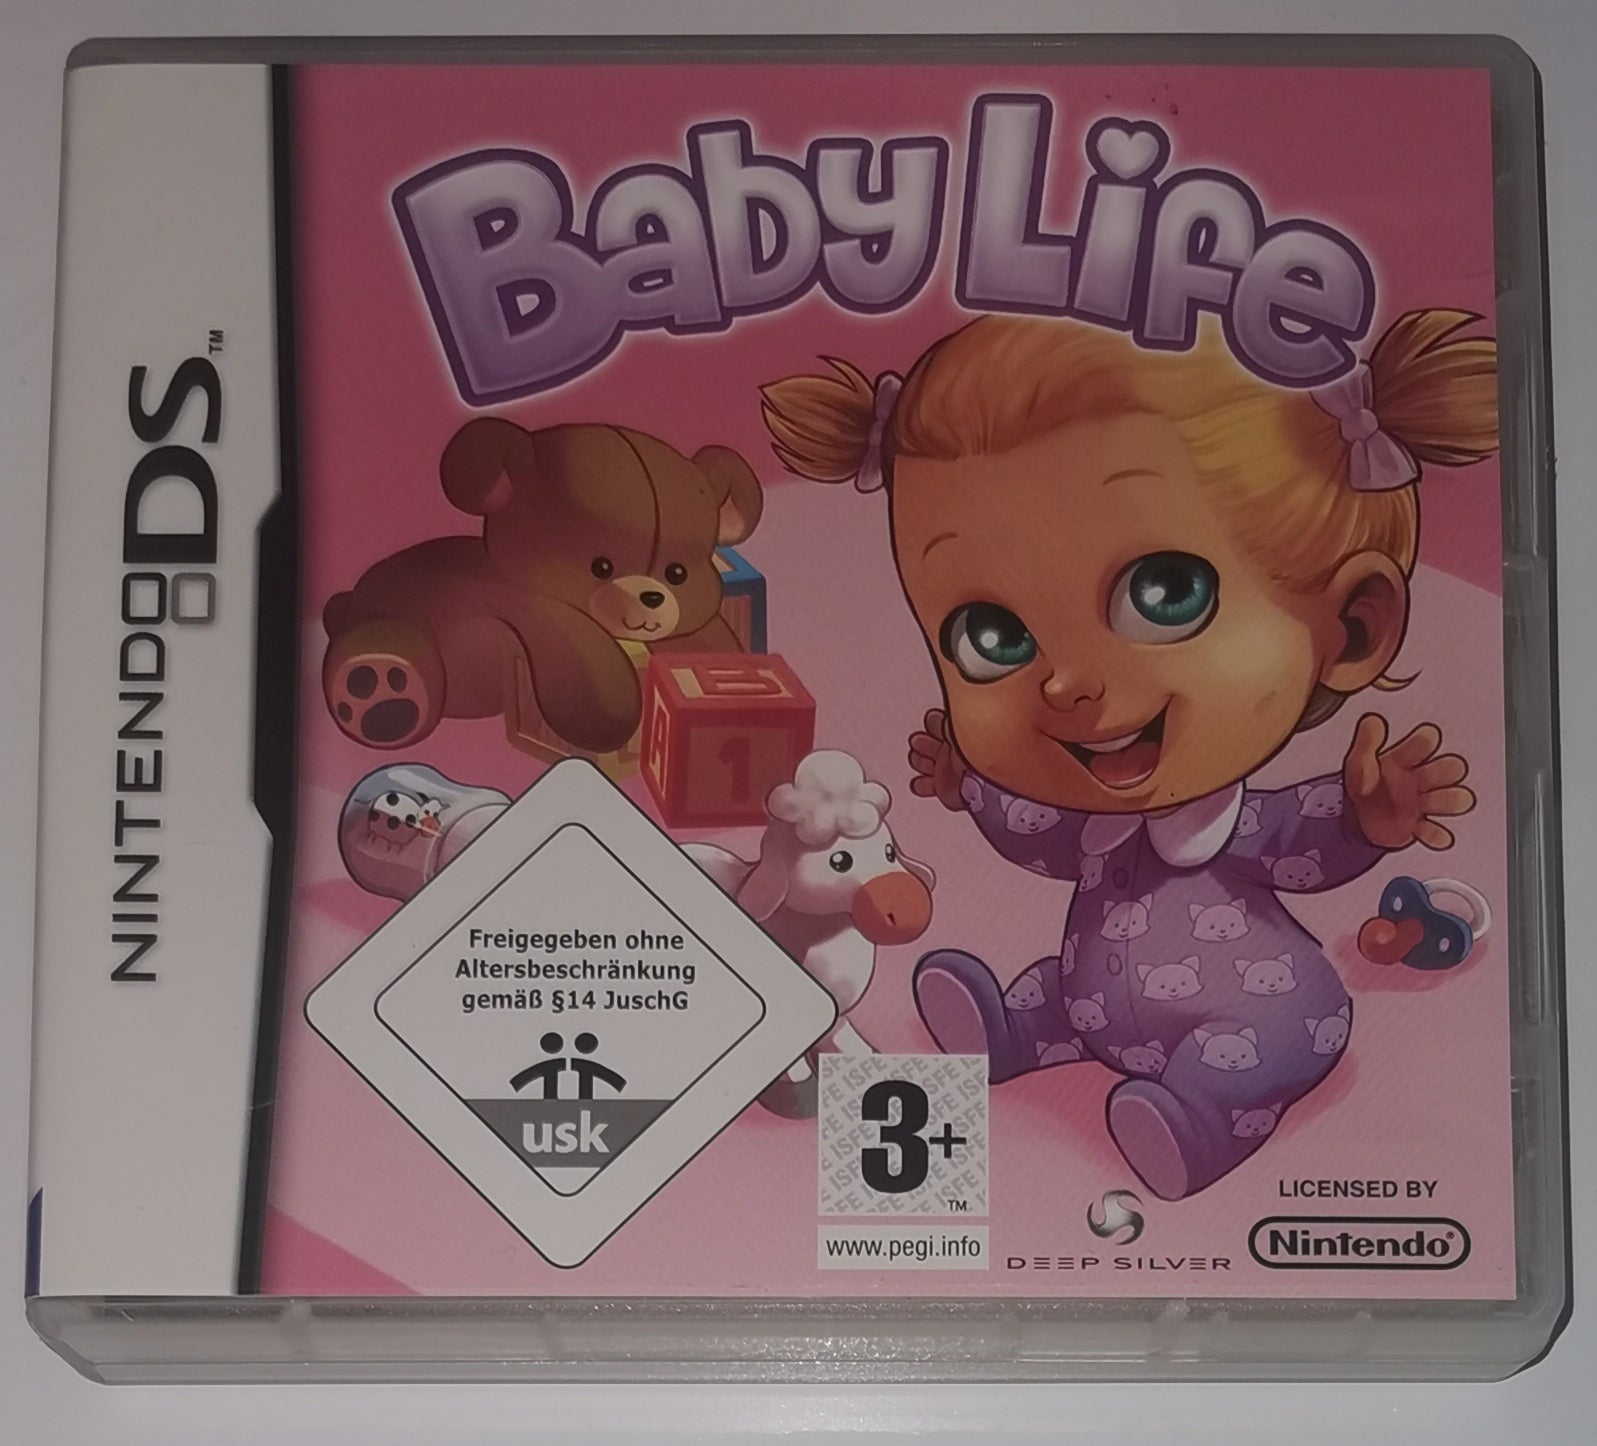 Third Party Baby life Occasion Nintendo DS 4020628502539 [Gut]